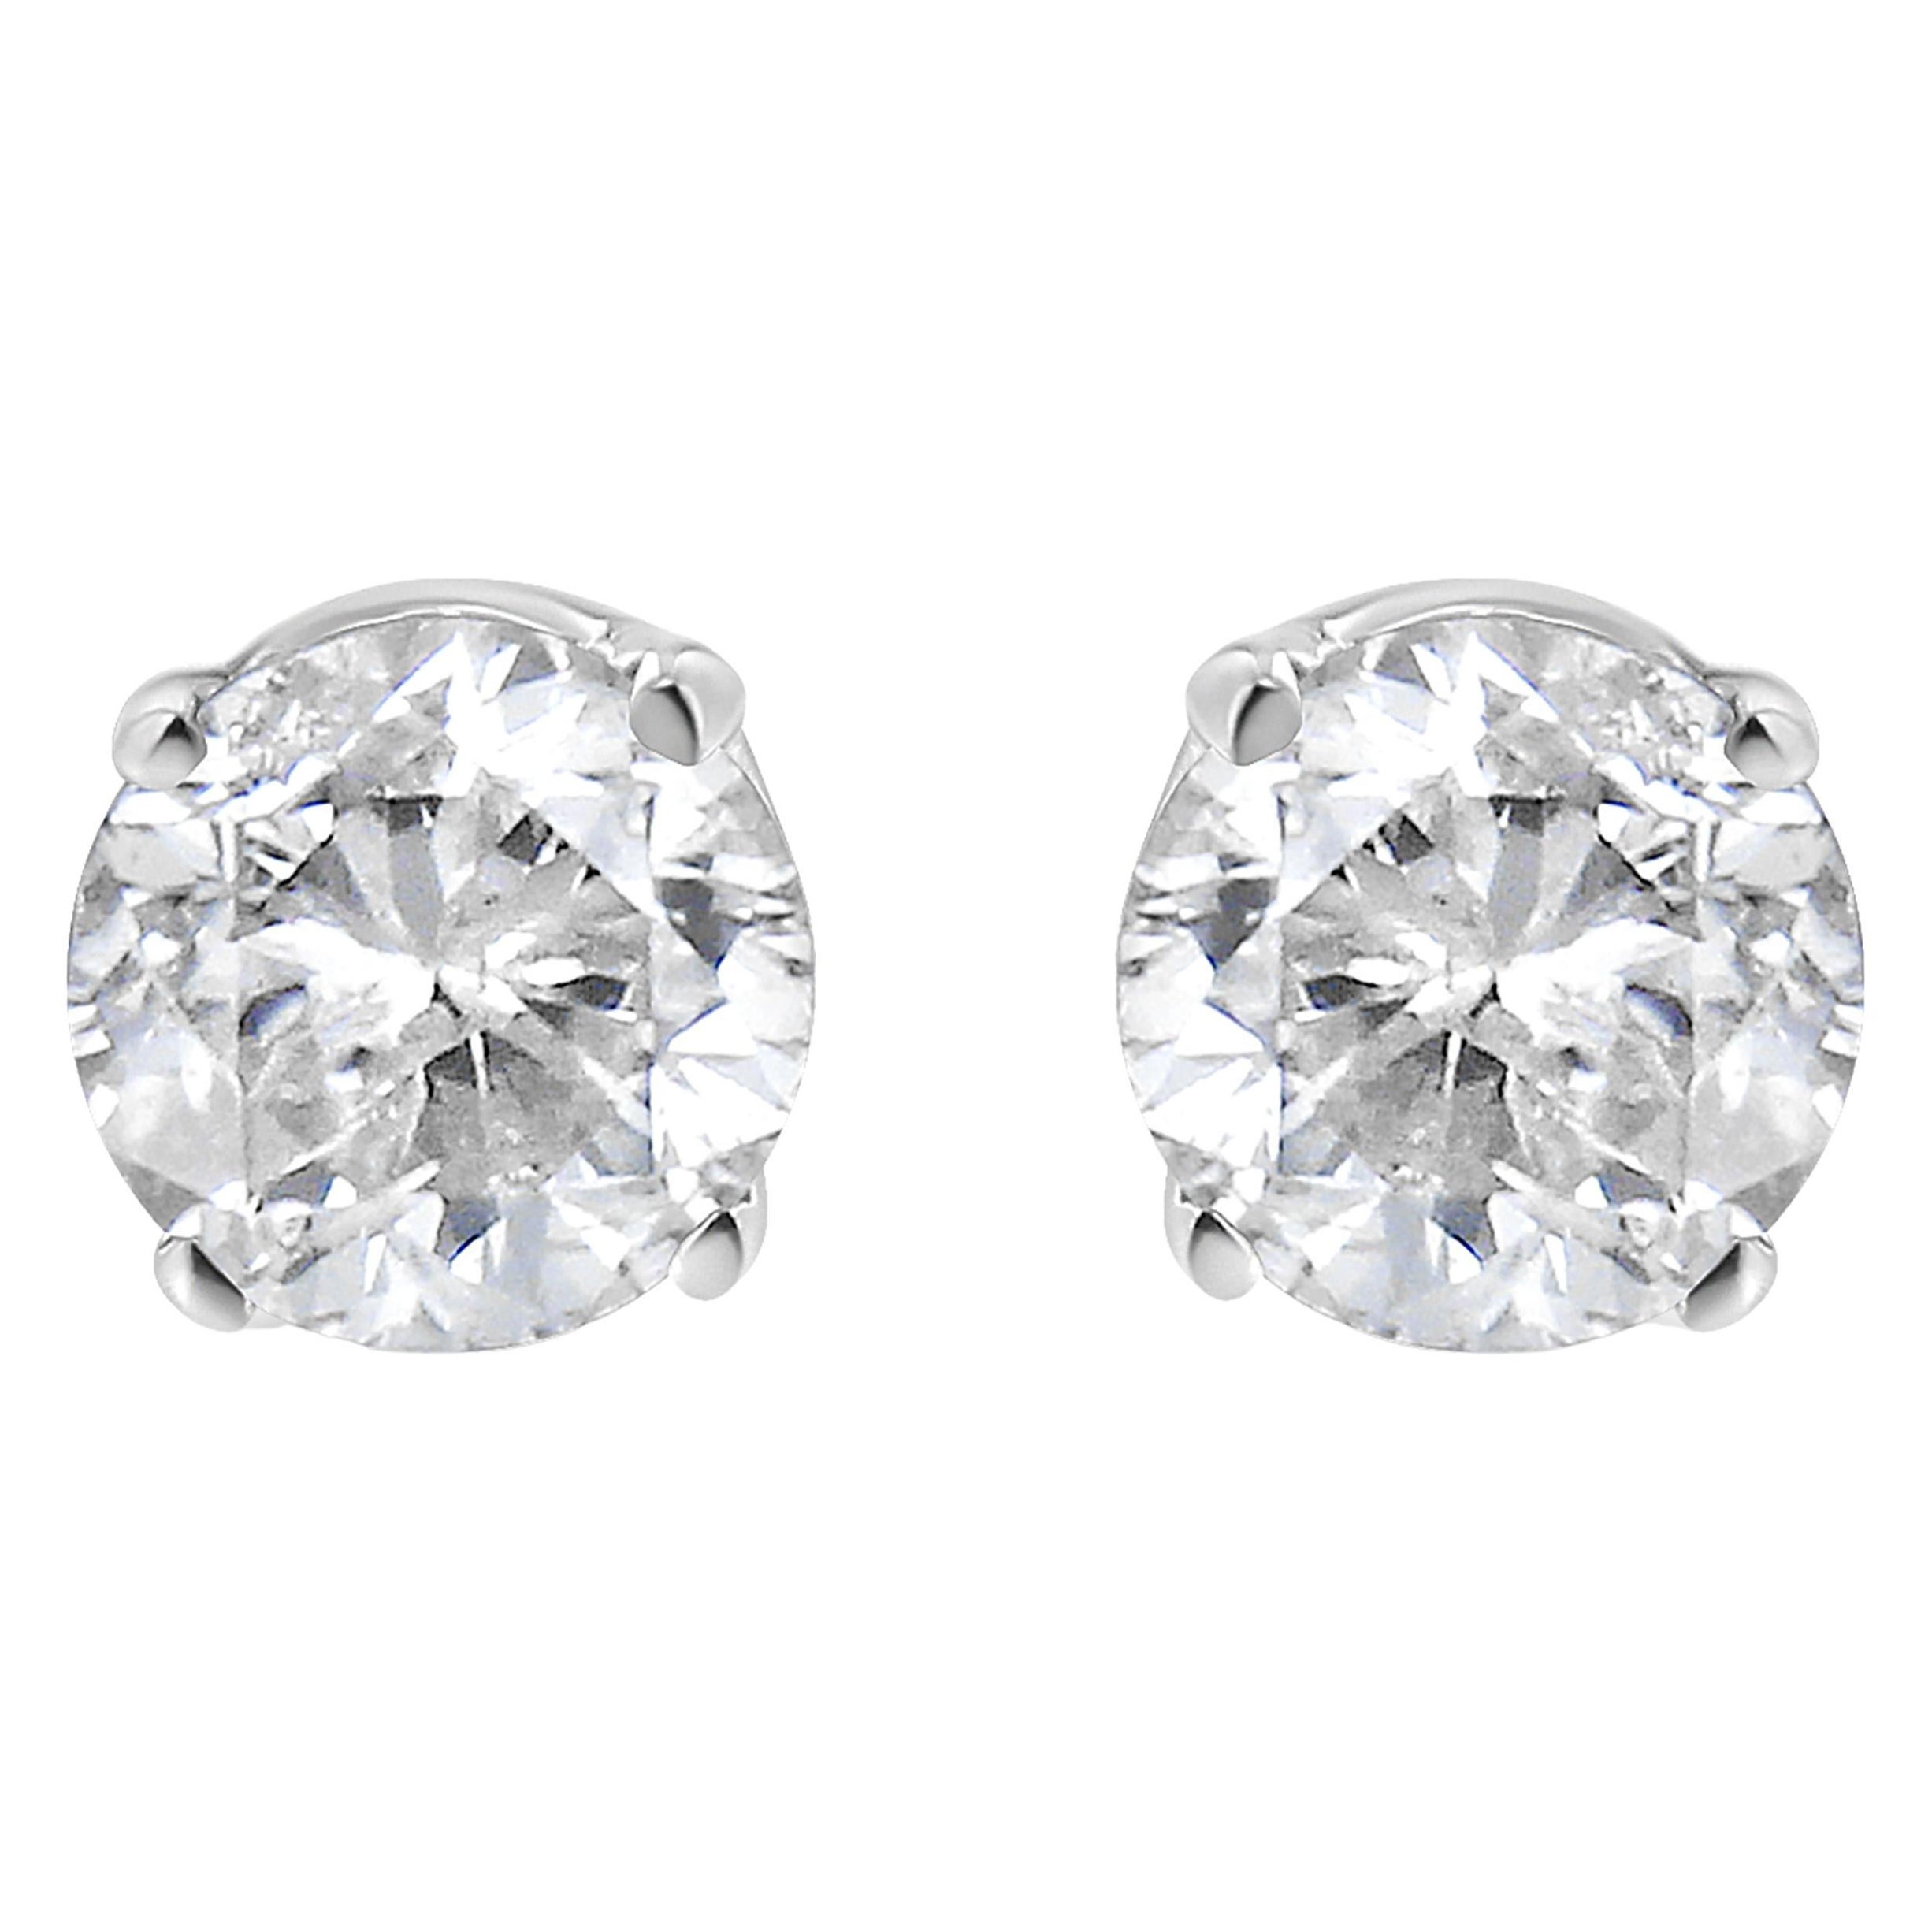 AGS Certified 14K White Gold 1.0 Carat Round-Cut Solitaire Diamond Stud Earrings For Sale